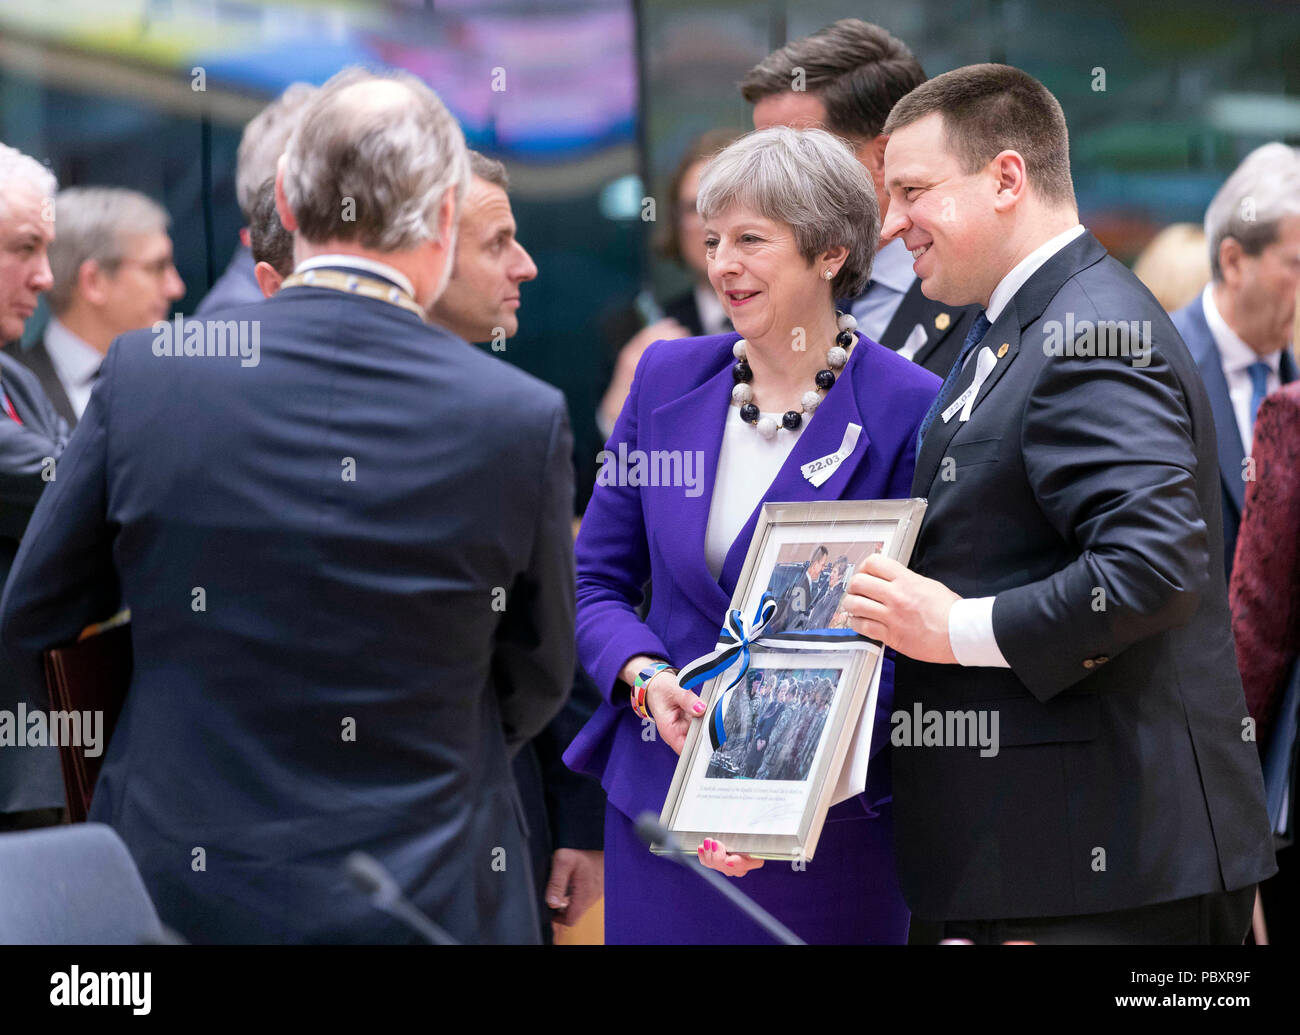 Belgium, Brussels on 2018/03/22: Summit of EU Heads of States. British Prime Minister Theresa May and Juri Ratas, Prime Minister of Estonia Stock Photo